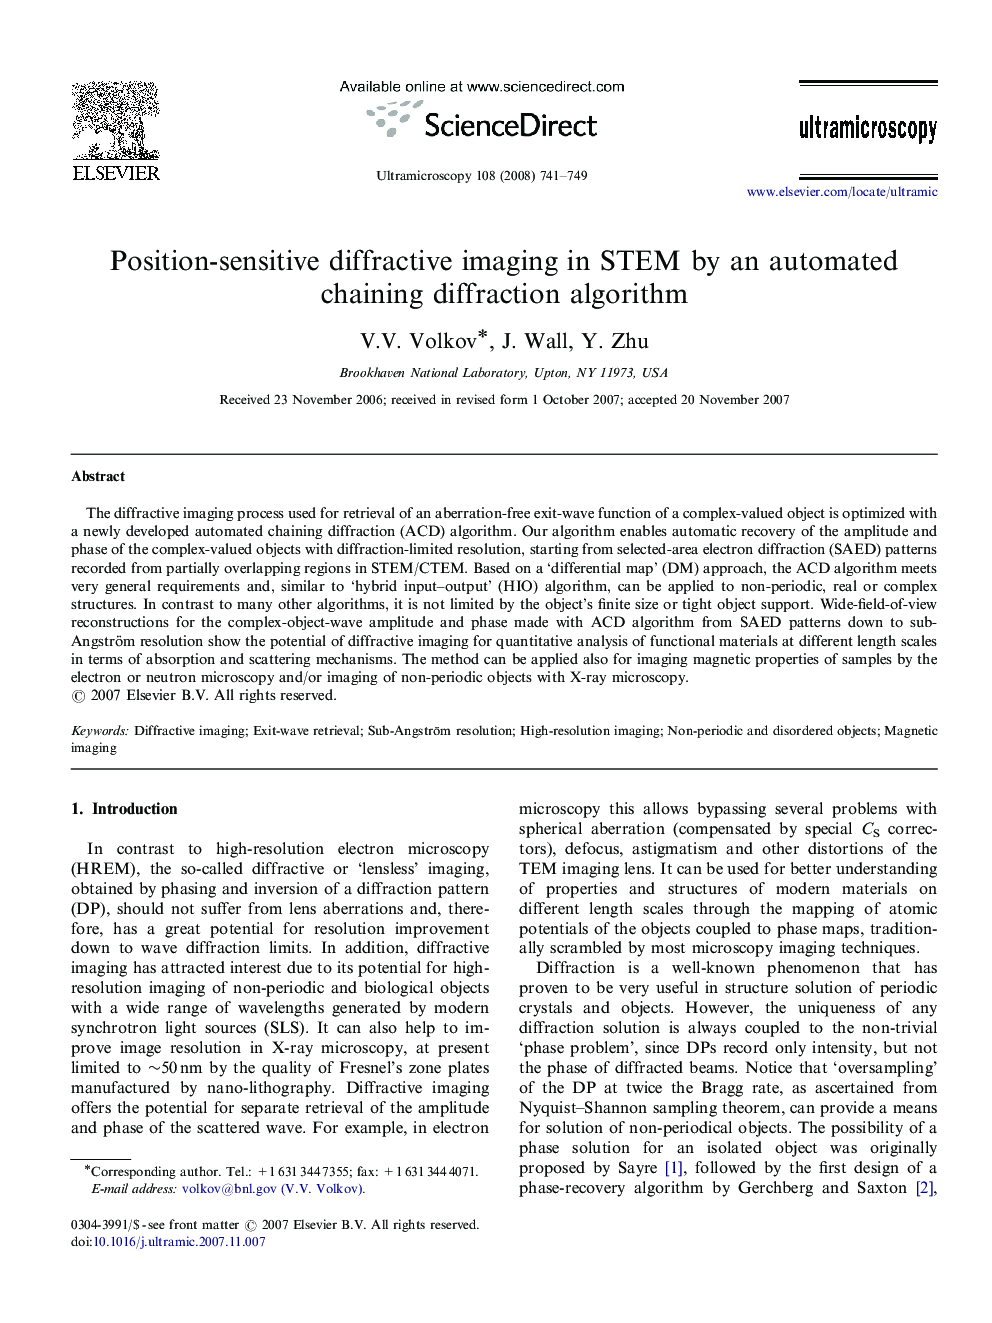 Position-sensitive diffractive imaging in STEM by an automated chaining diffraction algorithm